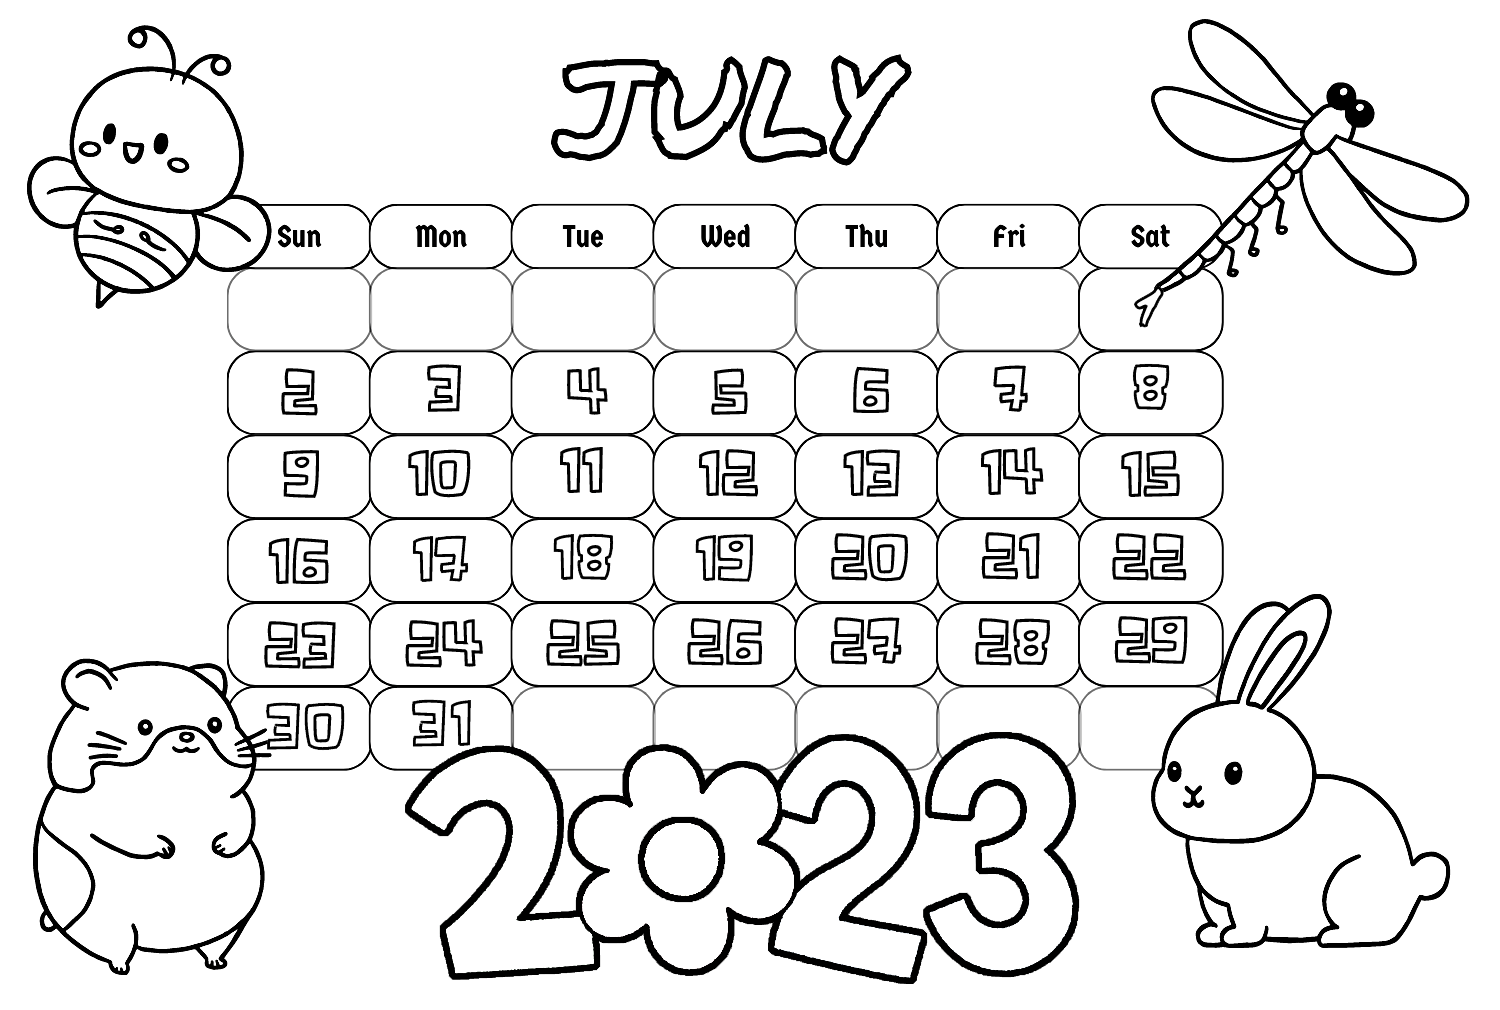 July coloring pages